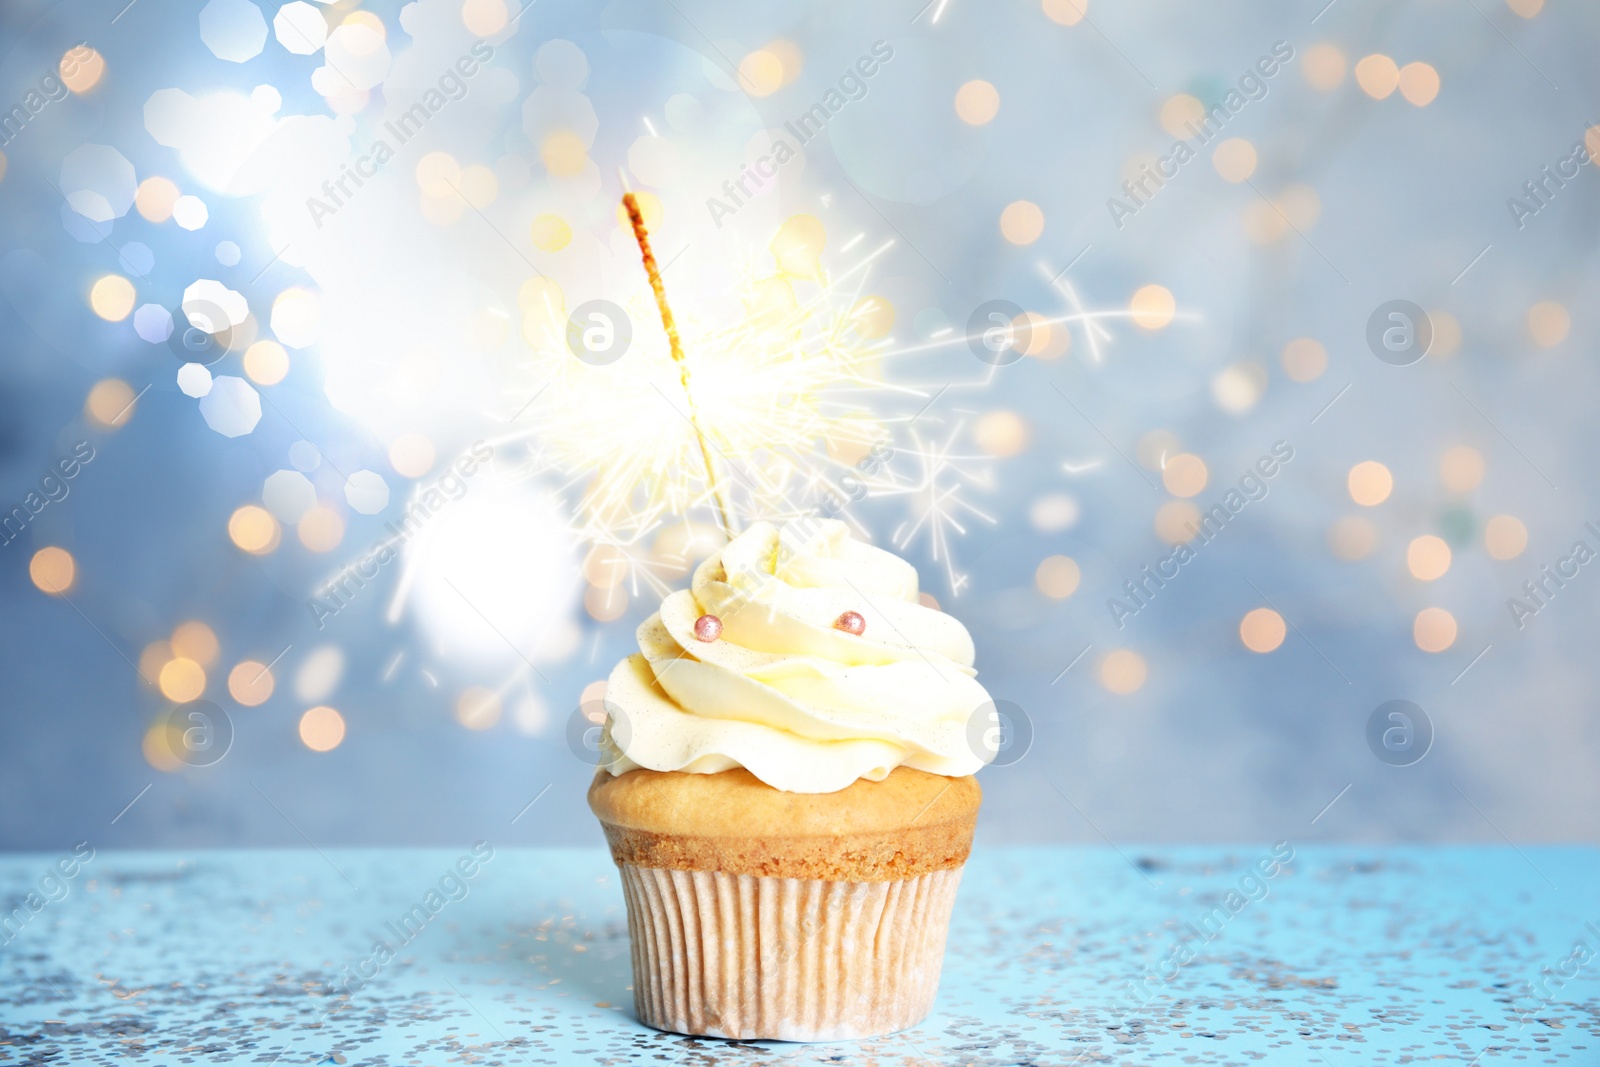 Image of Delicious birthday cupcake with sparkler on blue table against blurred lights